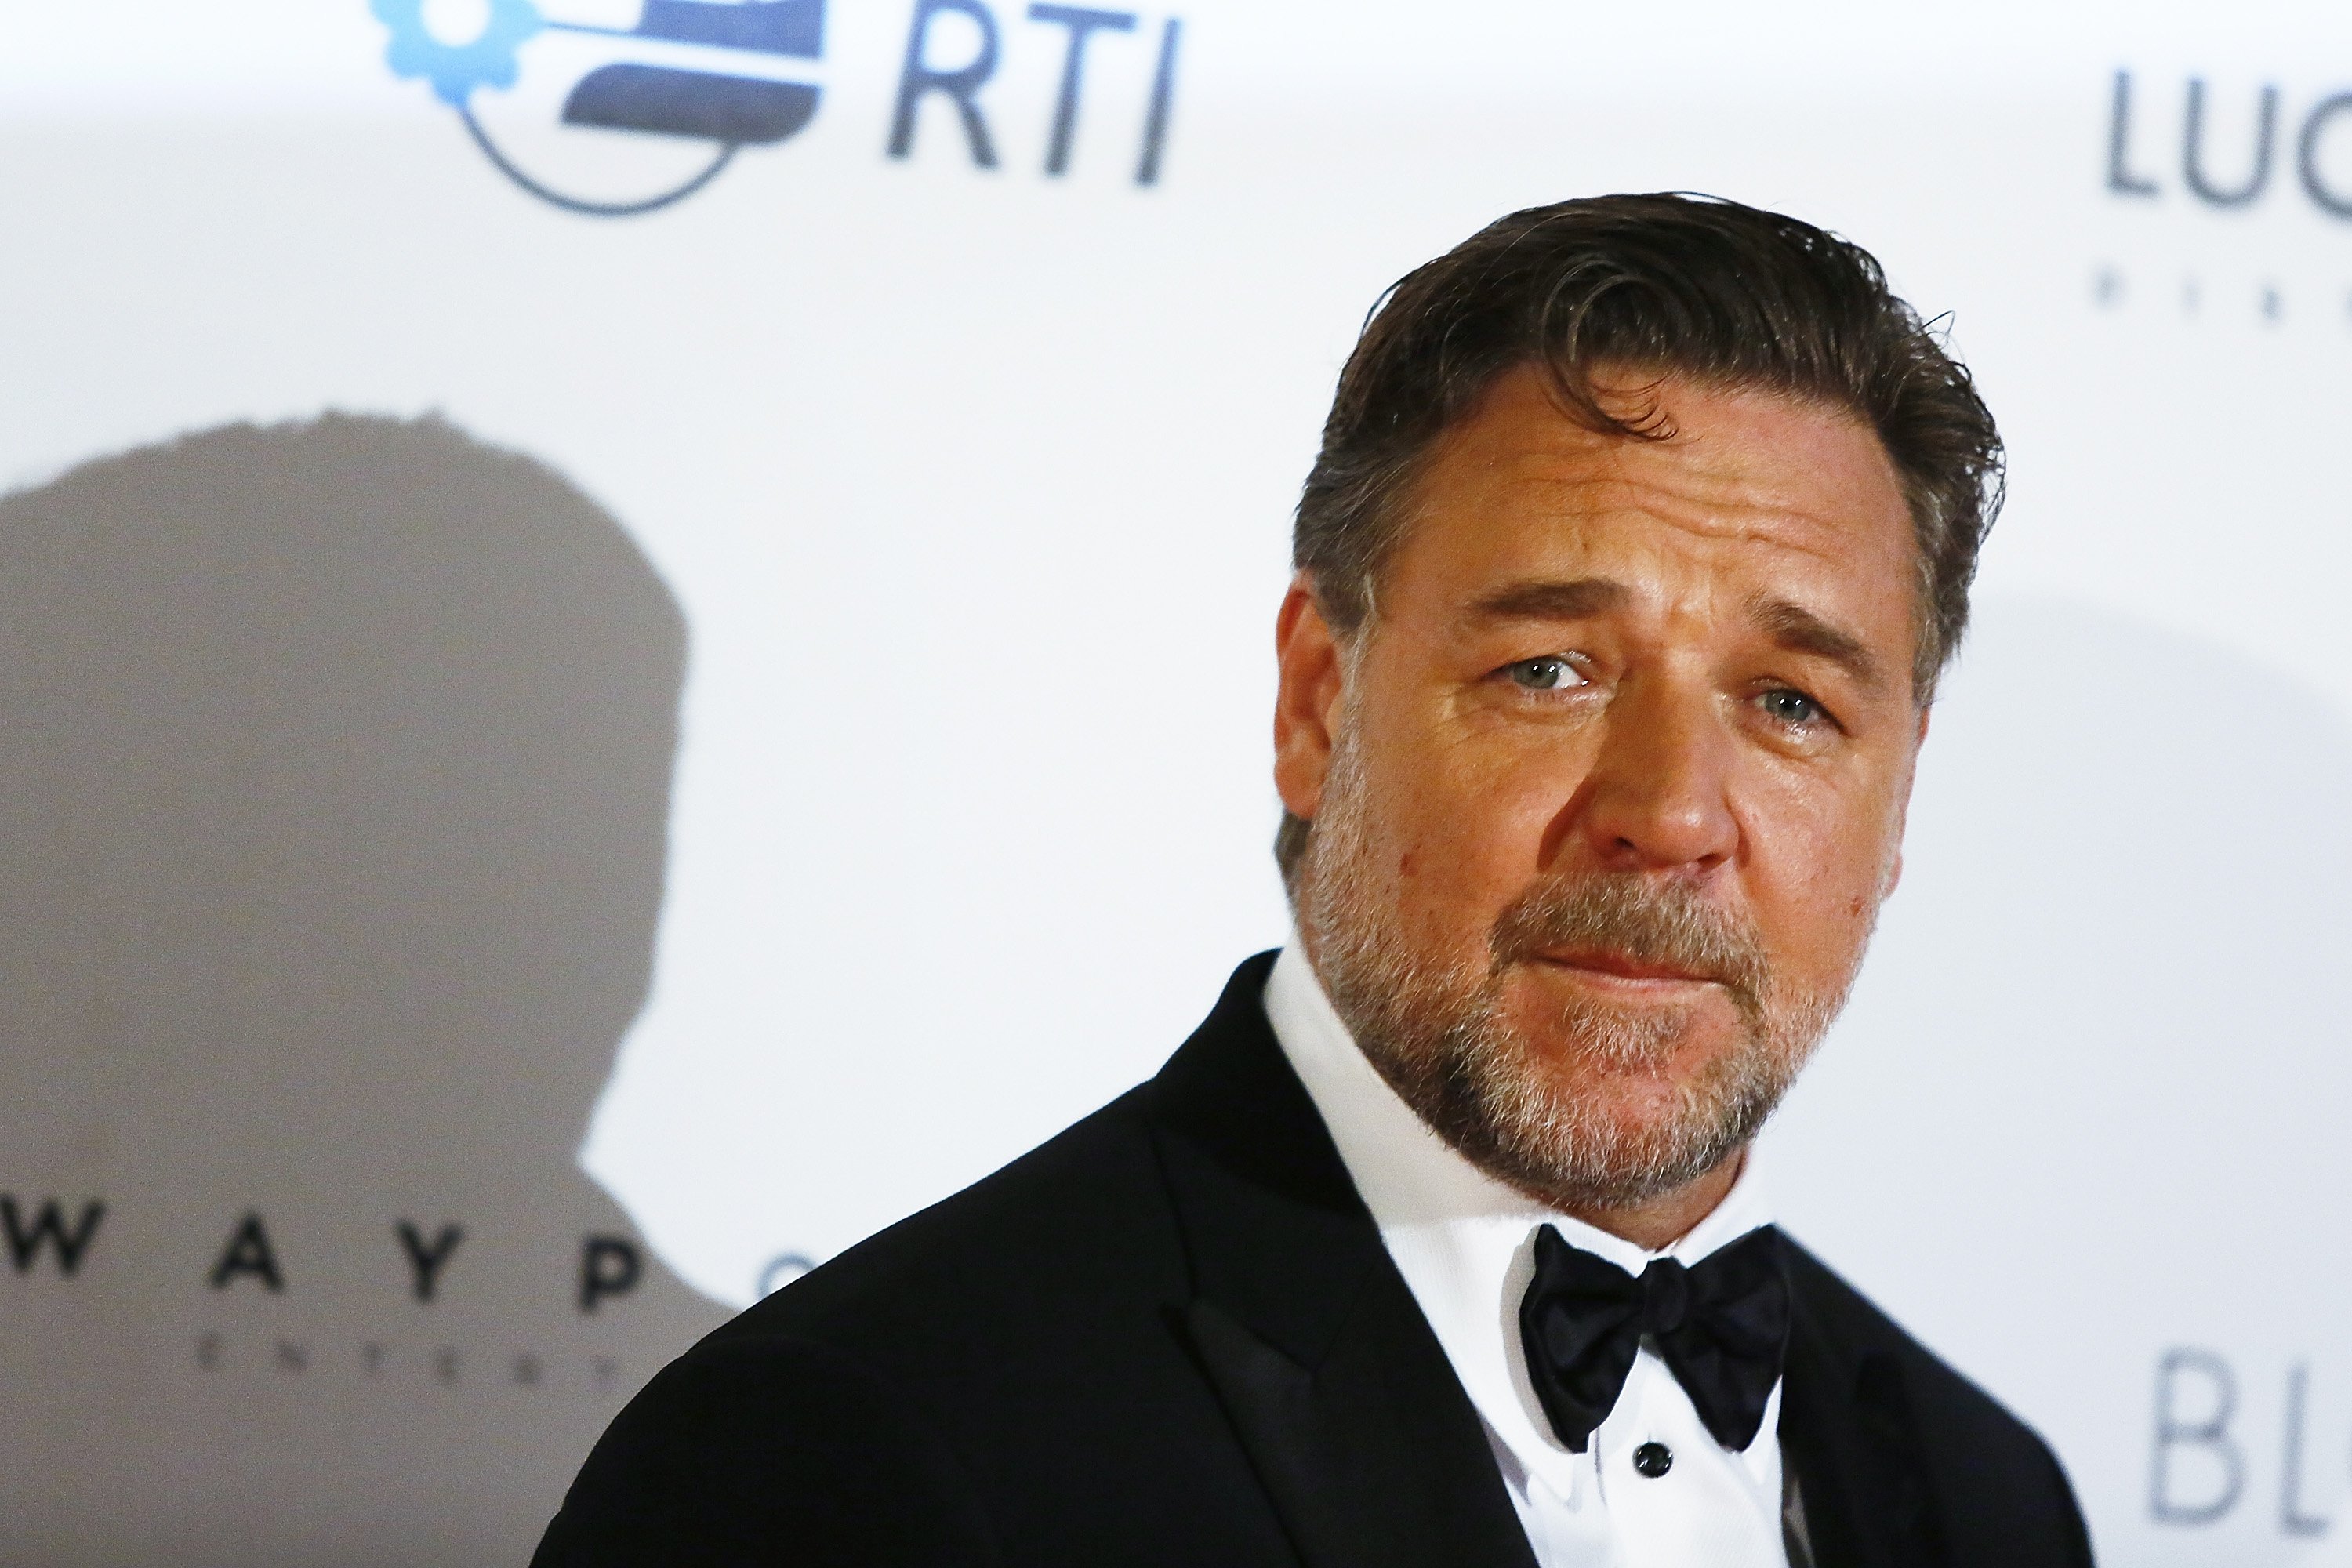 Russell Crowe will star in the film "Unhinged" | Photo:Getty Images